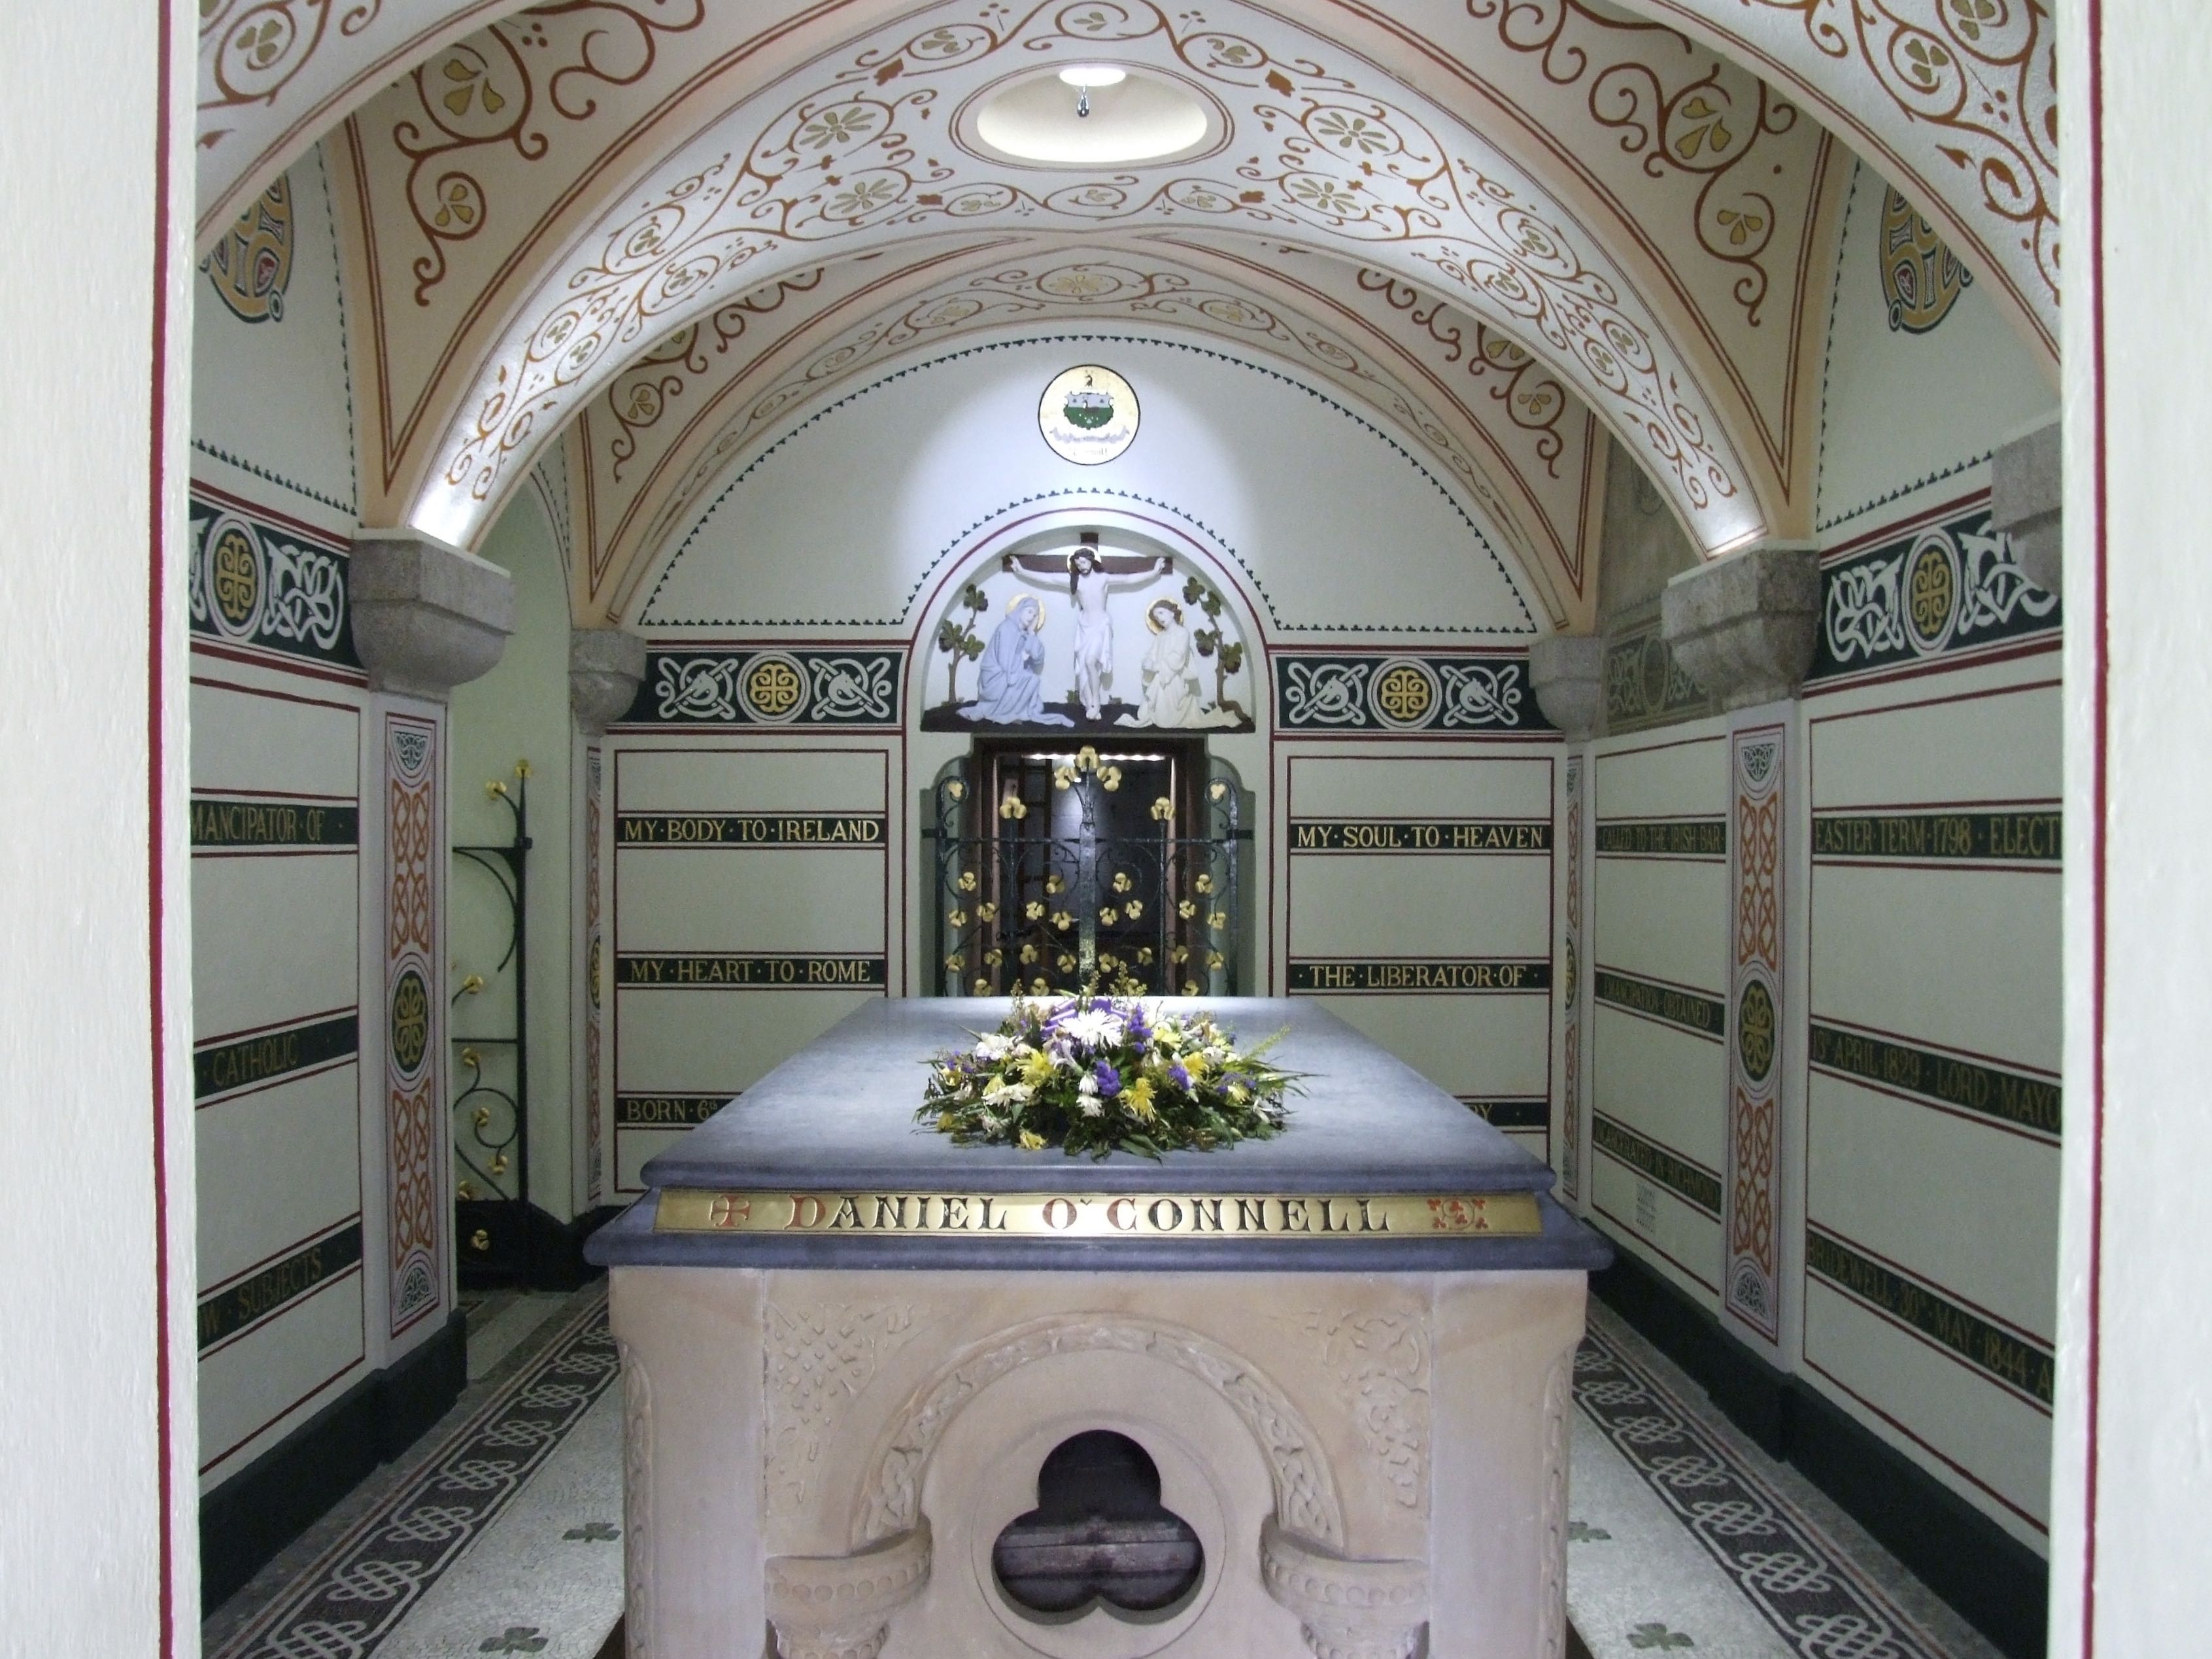 Inside Daniel O’Connell’s crypt.